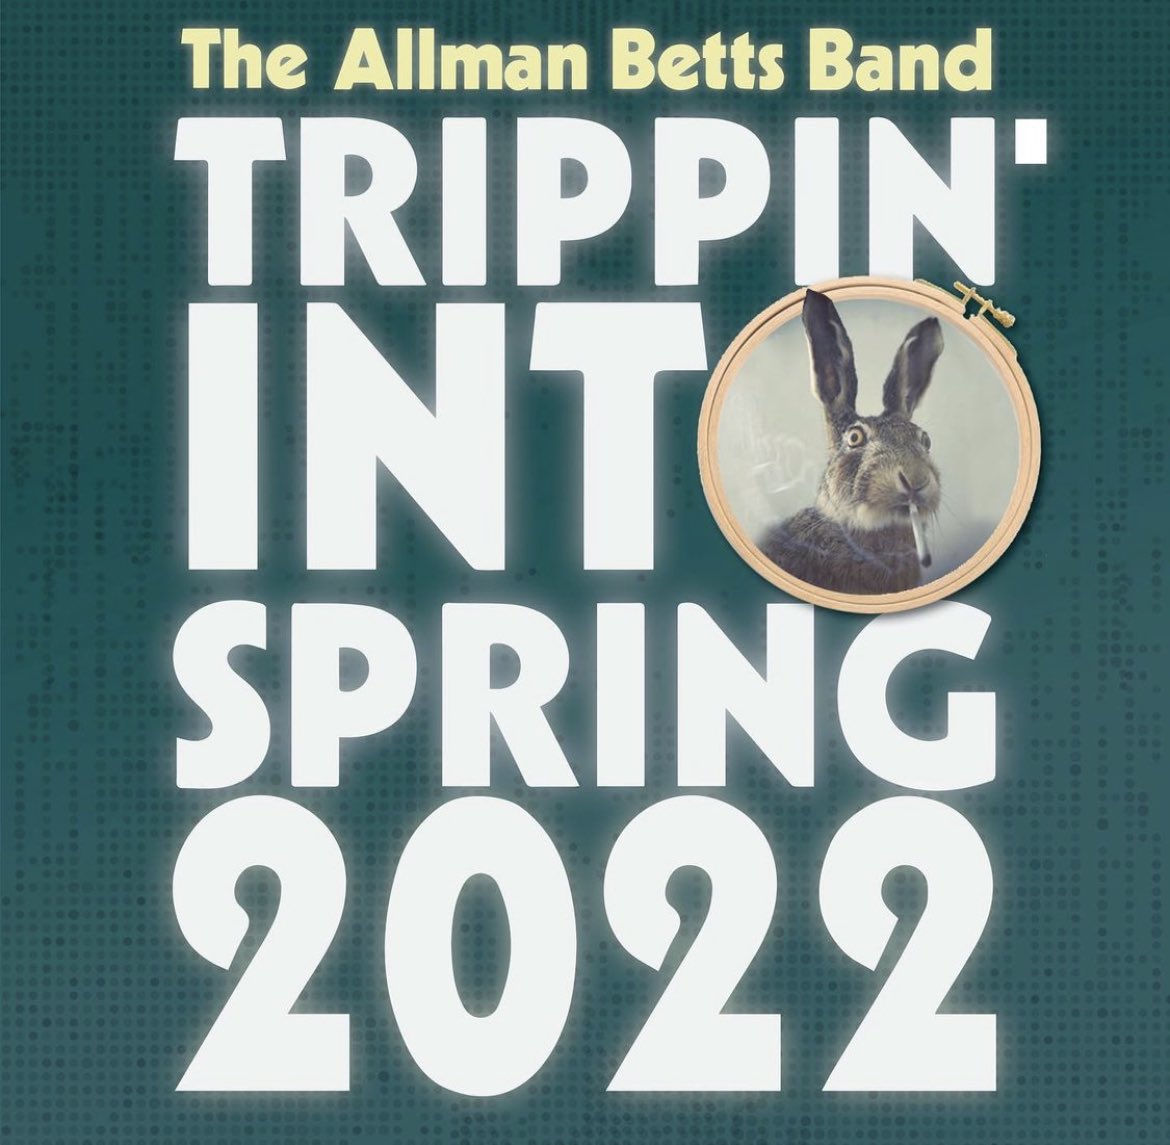 We have added more tour dates to the spring. Get your tickets at allmanbettsband.com today